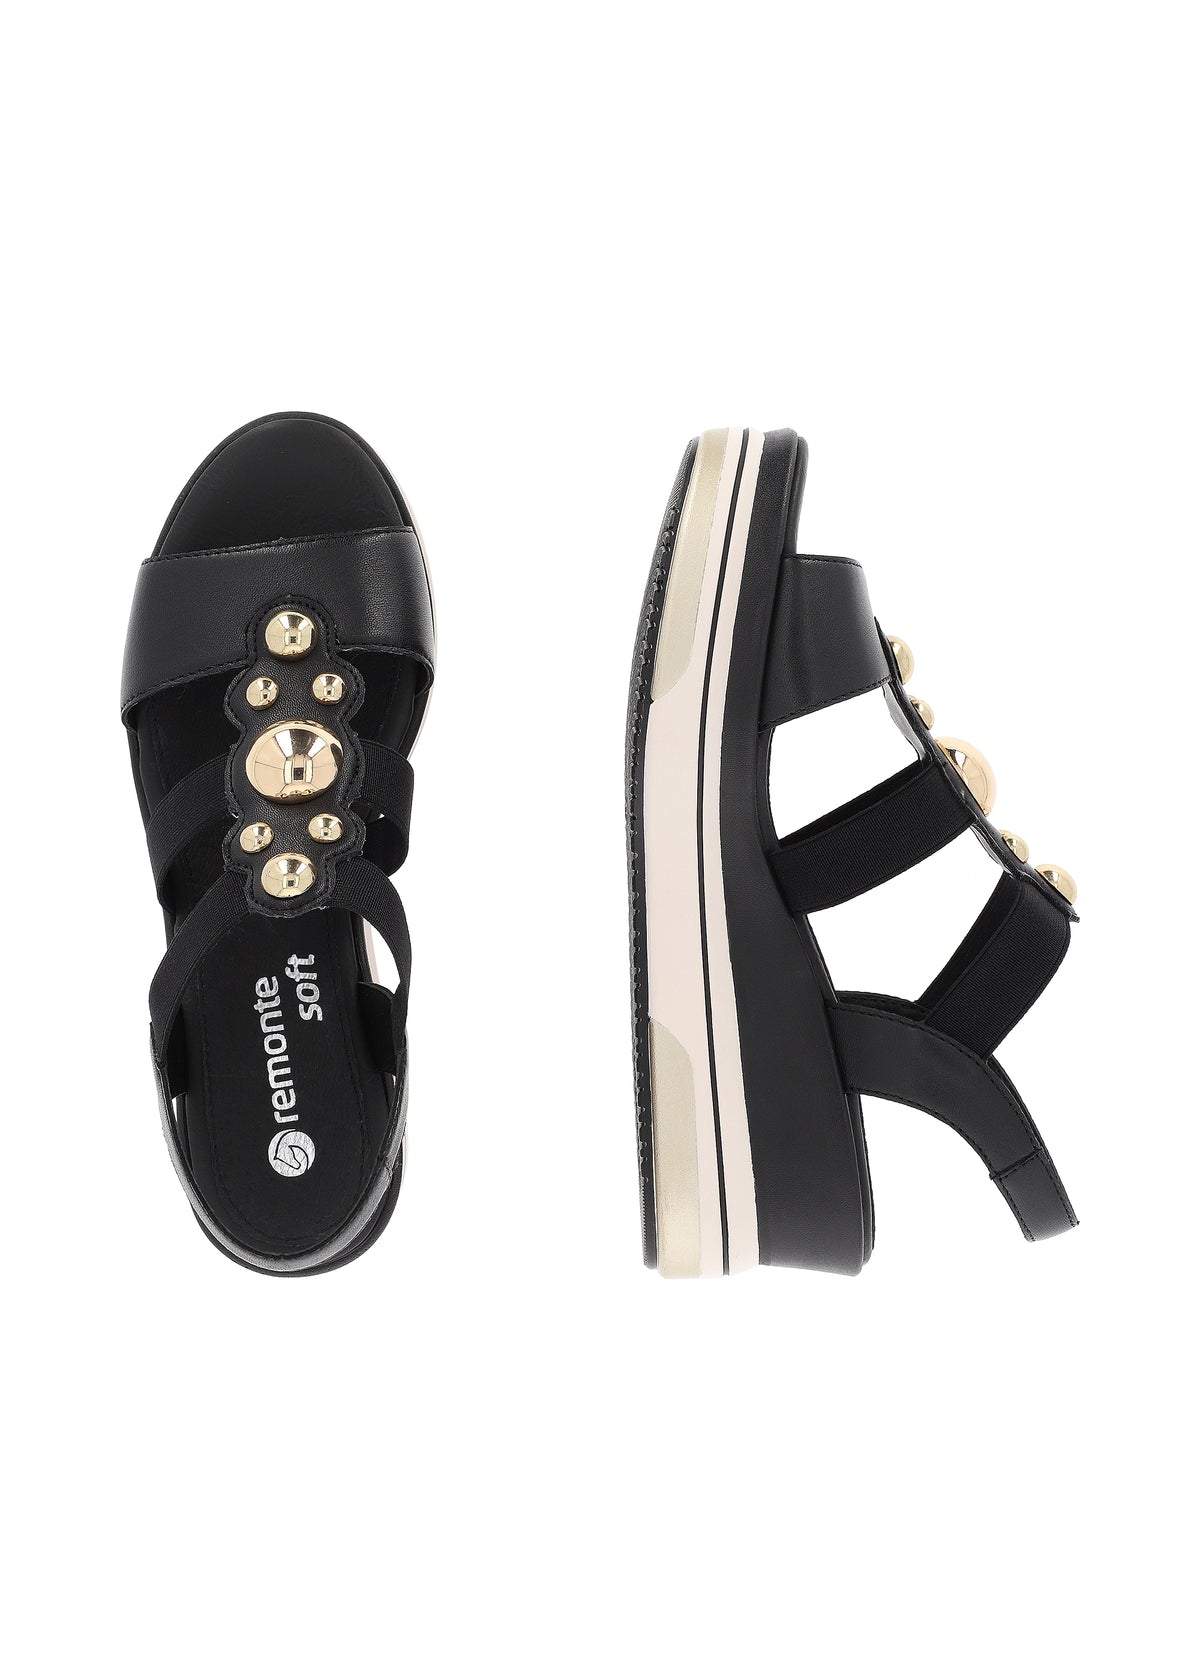 Sandals with a wedge sole - black, gold decorations